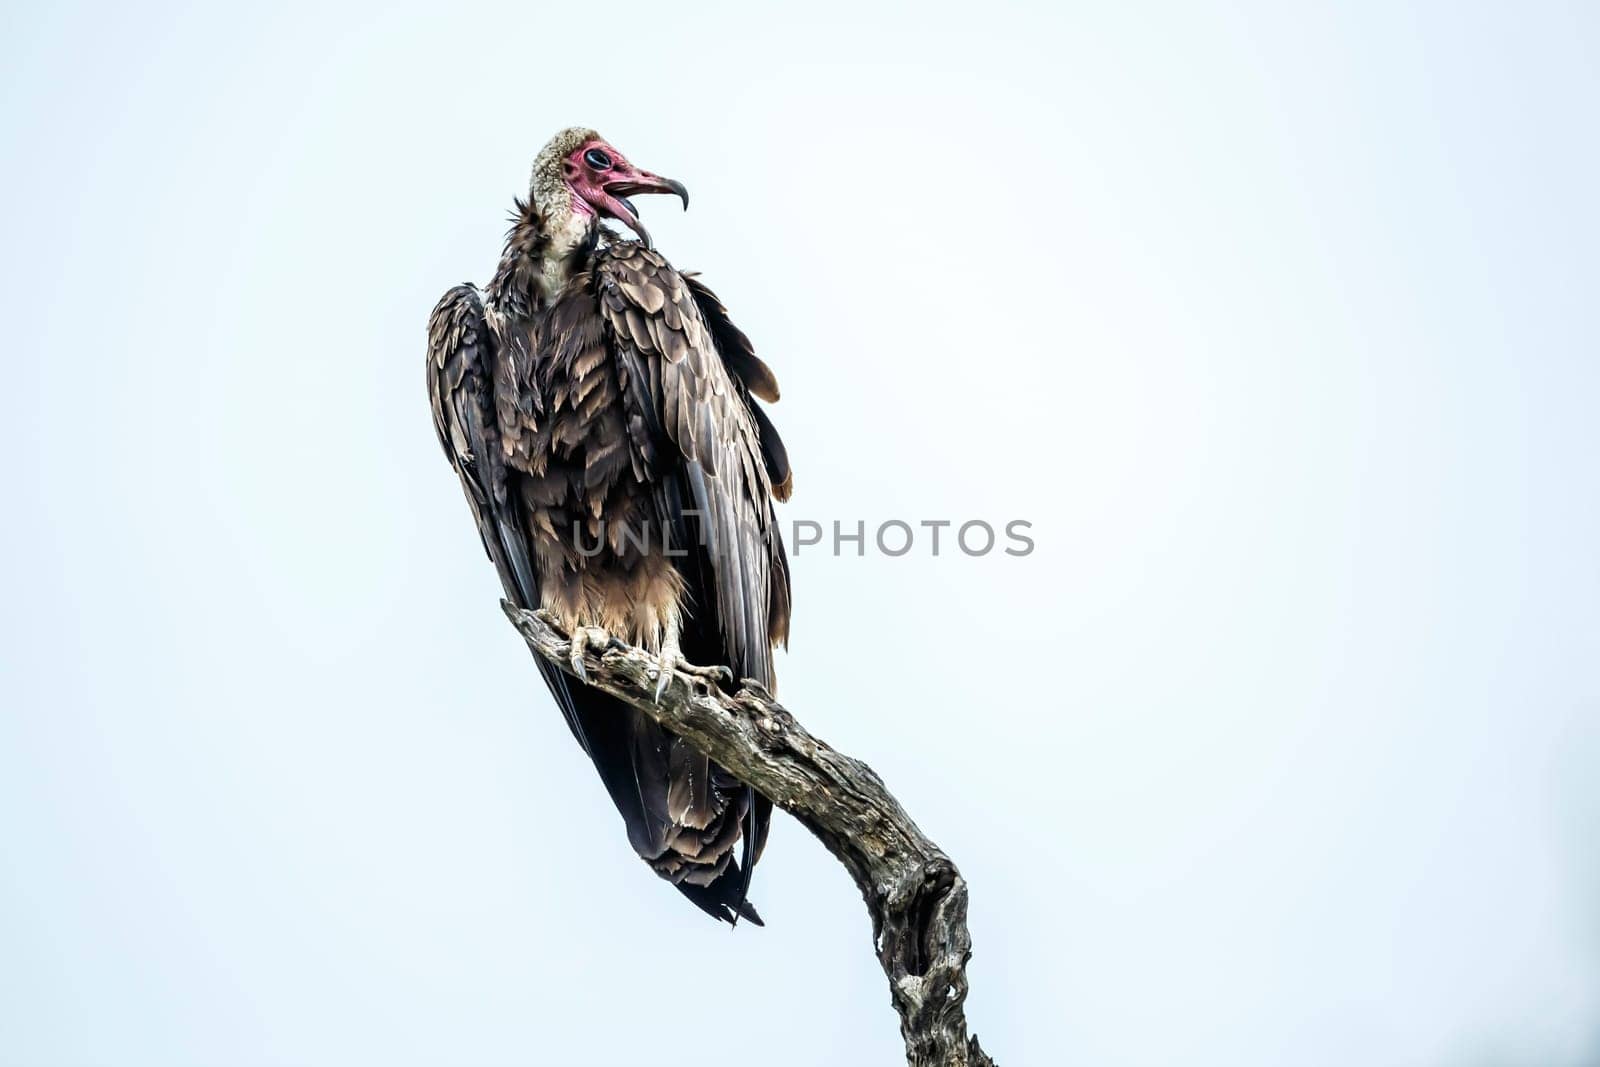 Hooded vulture in Kruger National park, South Africa by PACOCOMO